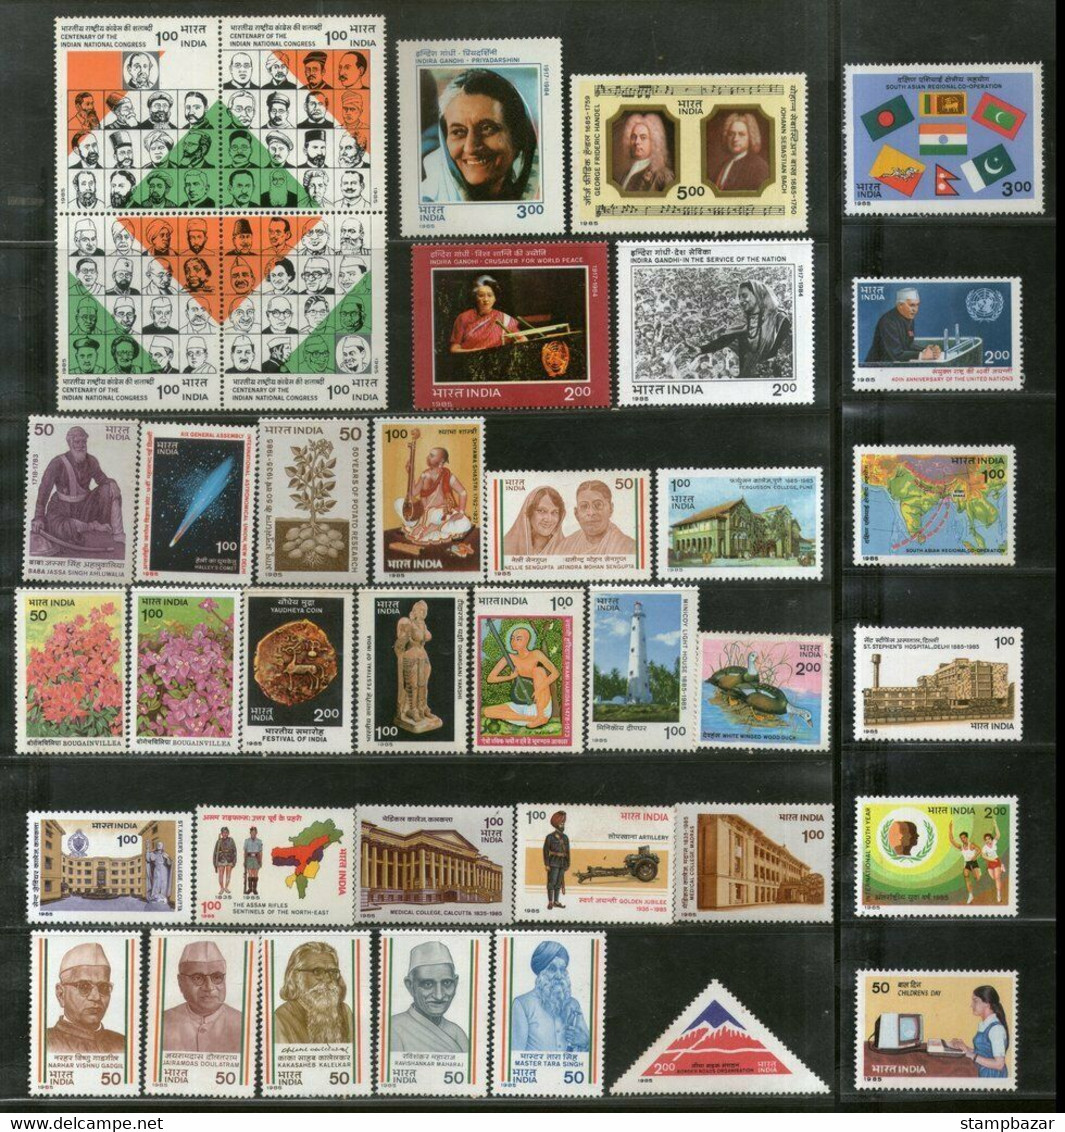 India 1985 Inde Indien Year Pack Full Complete Set Of 38 Stamps Assorted Themes MNH - Años Completos